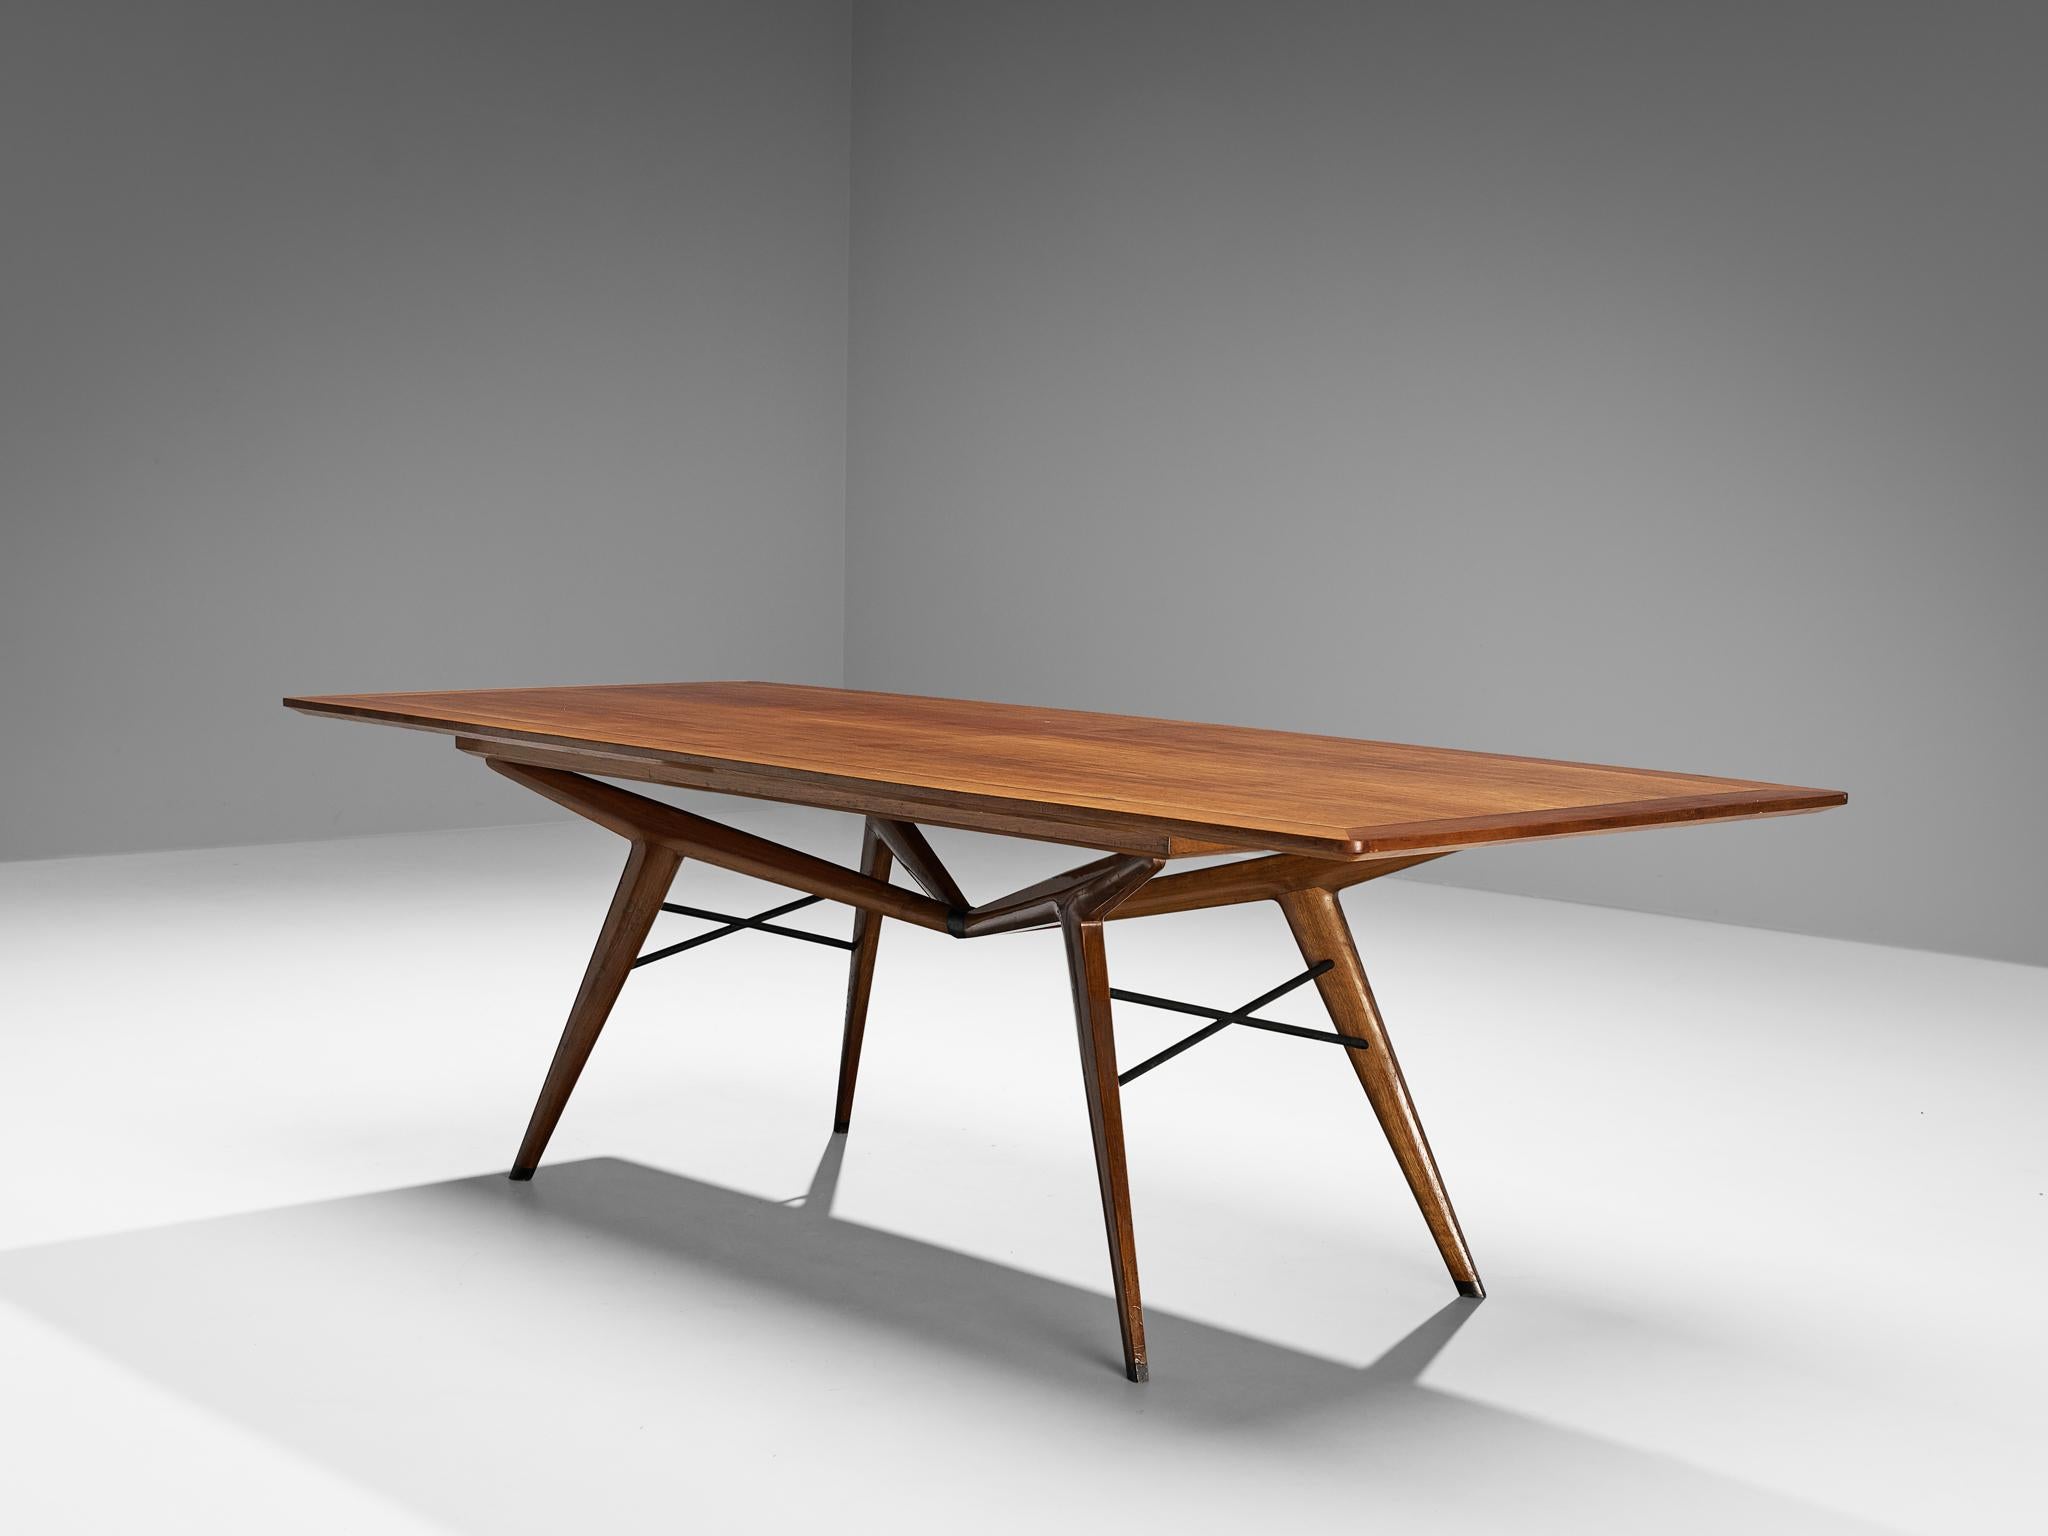 Dining table, walnut, bronze, brass, Italy, 1950s

Hailing from a skilled artisan of Italy, this dining table epitomizes excellence in its form, material use, composition, and craftsmanship. With an unidentified but undoubtedly highly talented maker